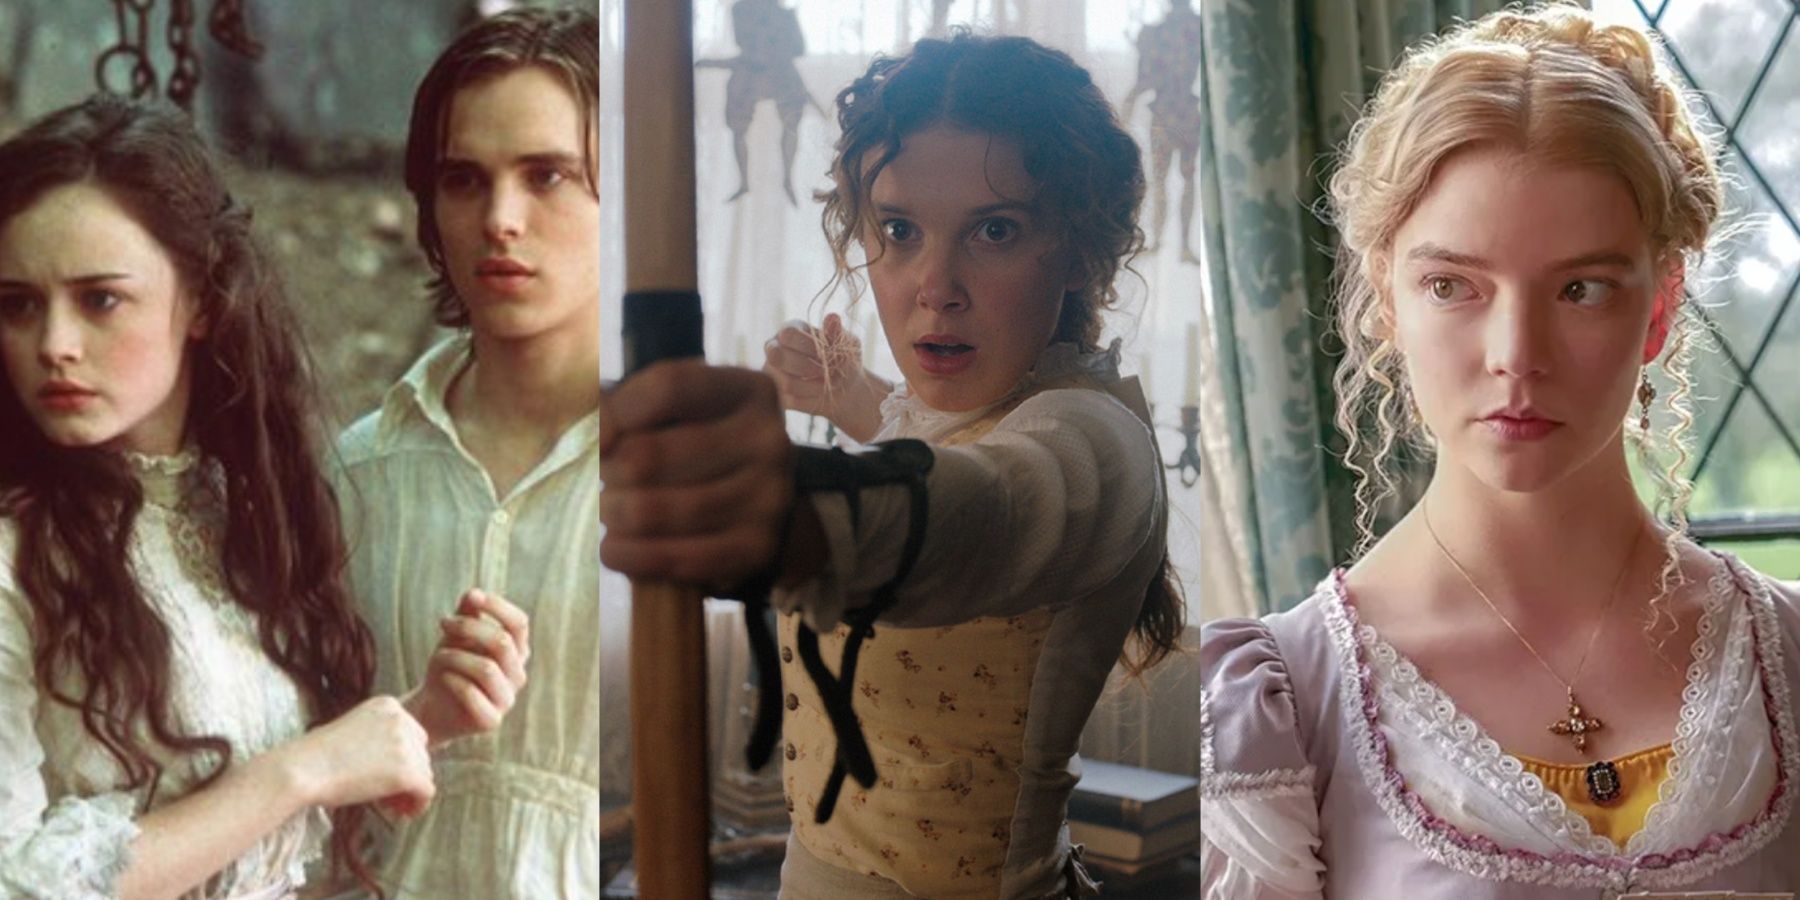 A side by side image features the main characters from Tuck Everlasting, Enola Holmes, and Emma